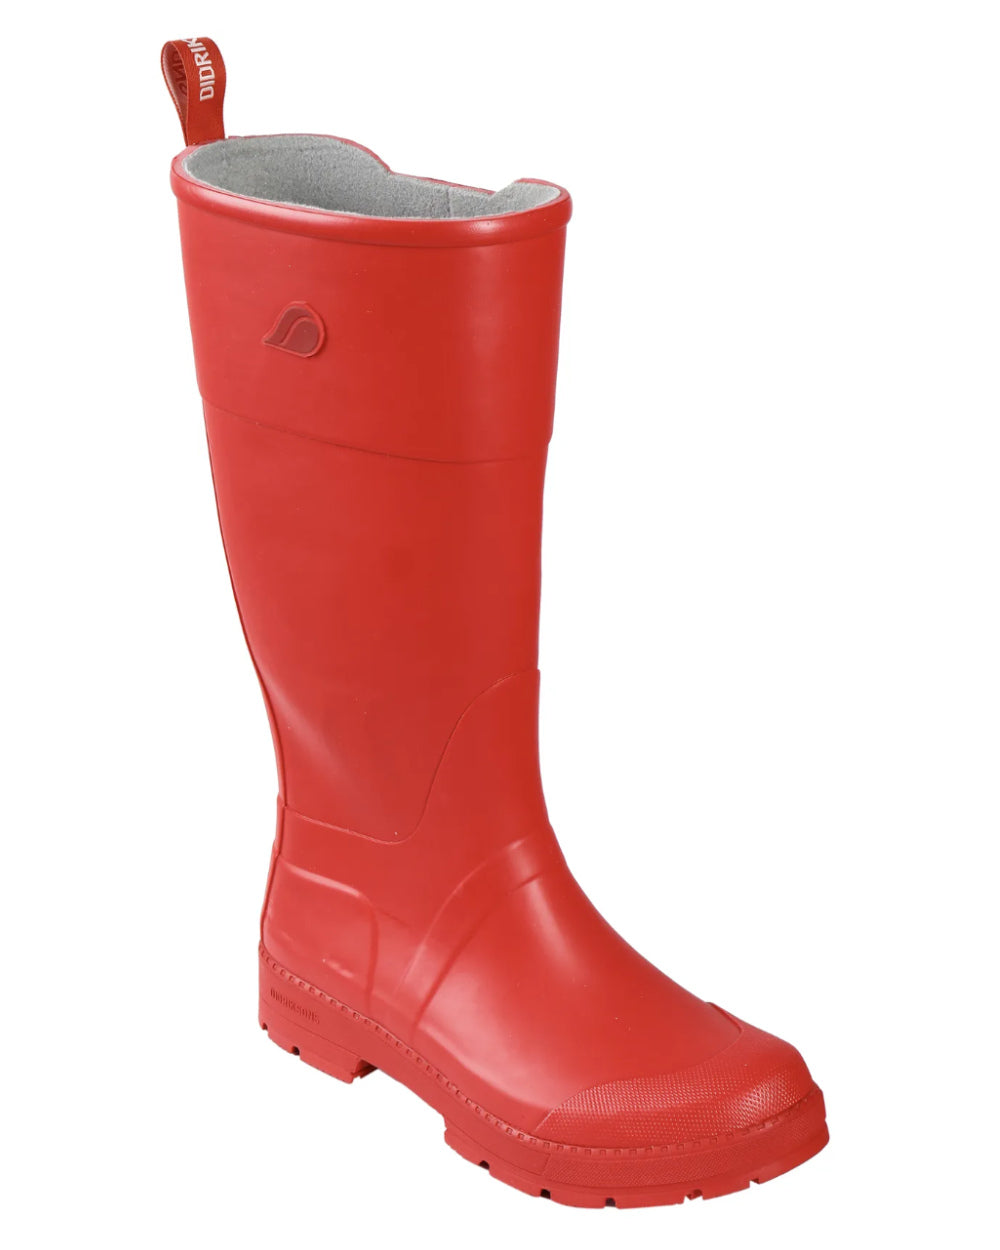 Chili Red Coloured Didriksons Koster Womens Rubber Boots On A White Background 